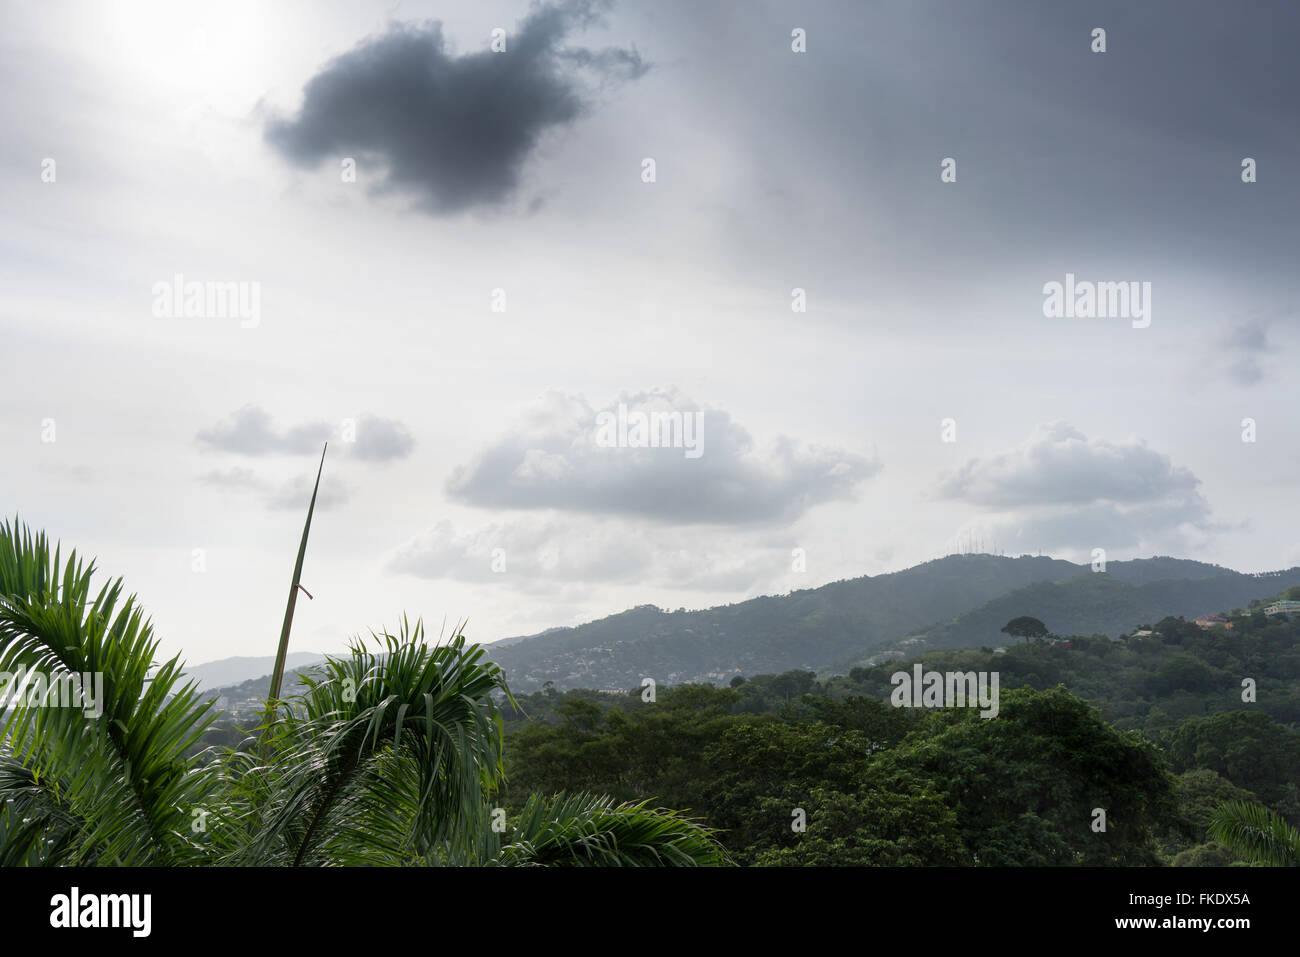 Distant view of city with mountain against cloudy sky, Trinidad, Trinidad And Tobago Stock Photo